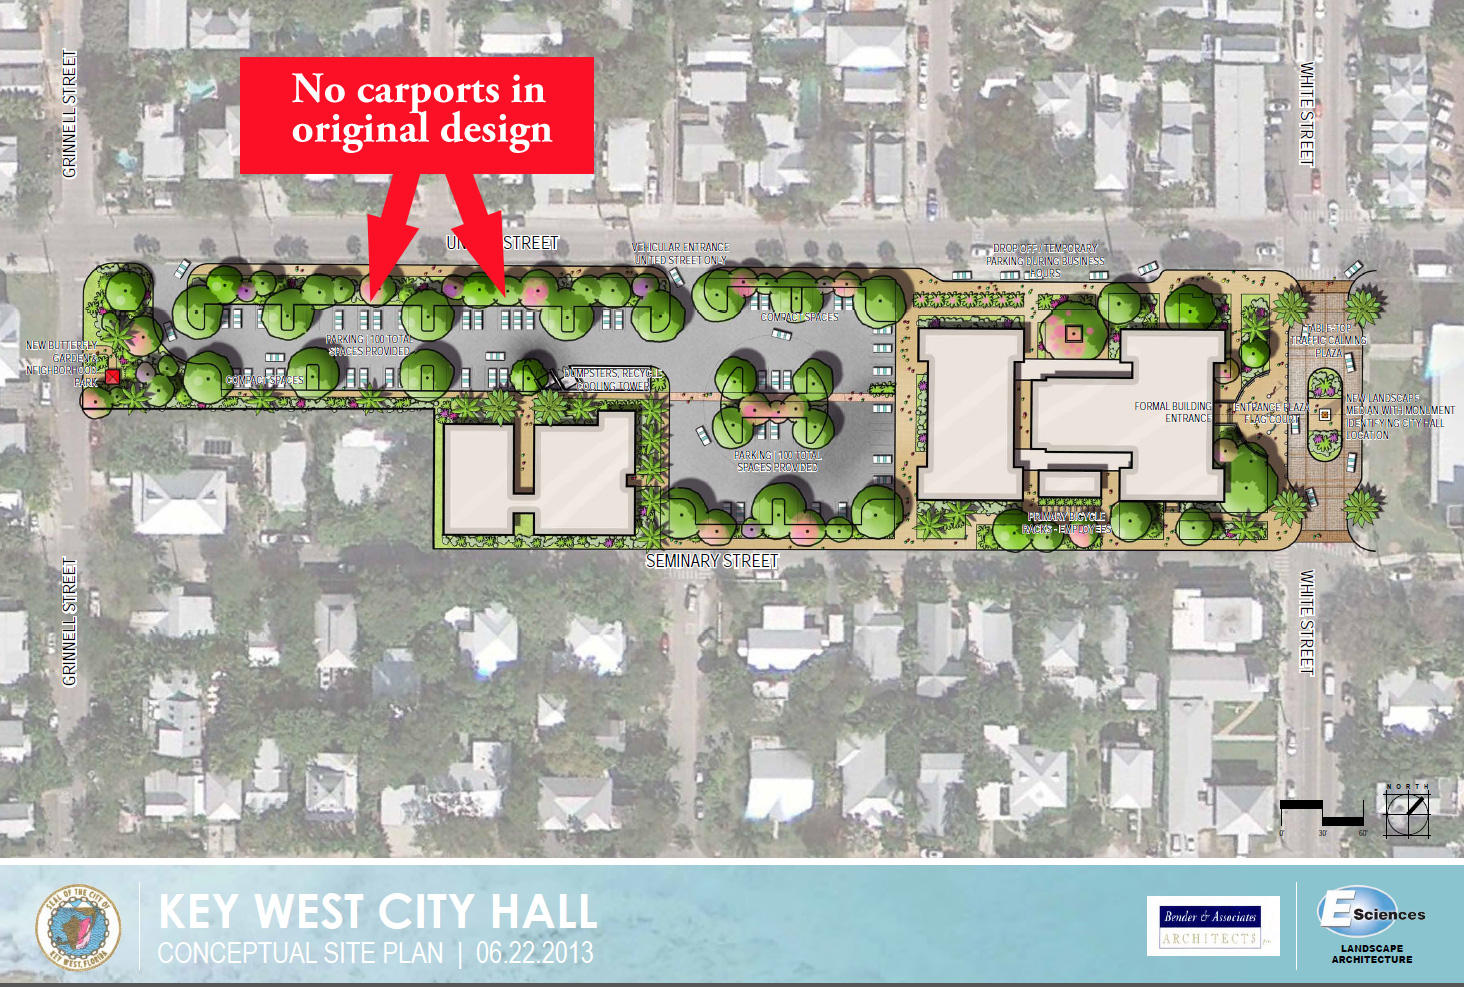 The City Hall Carports: An Open Letter to the City Commission